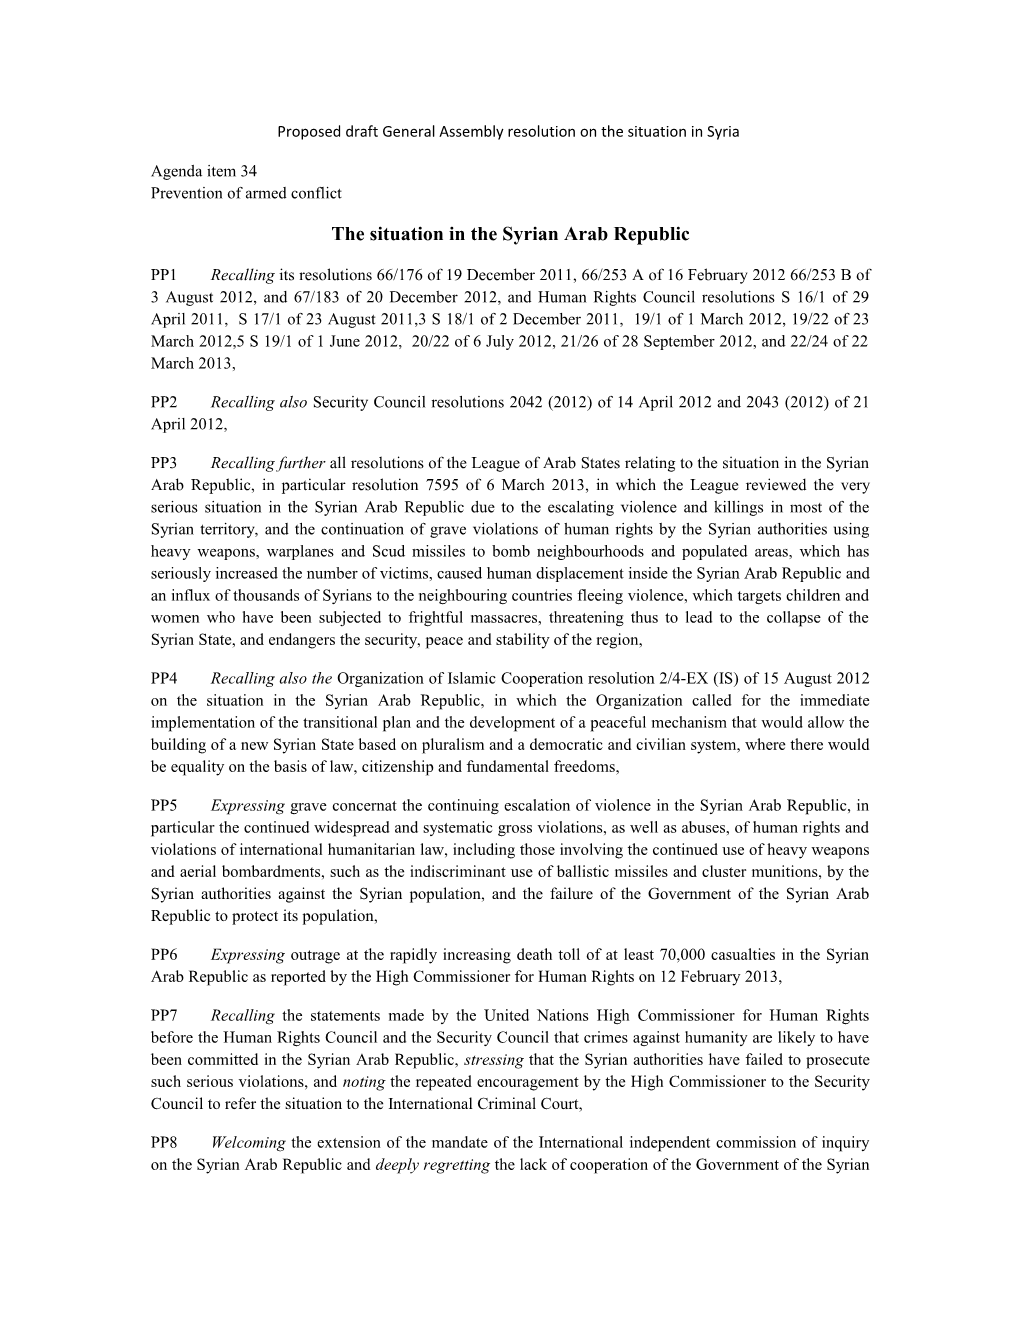 Proposed Draft General Assembly Resolution on the Situation in Syria REV4